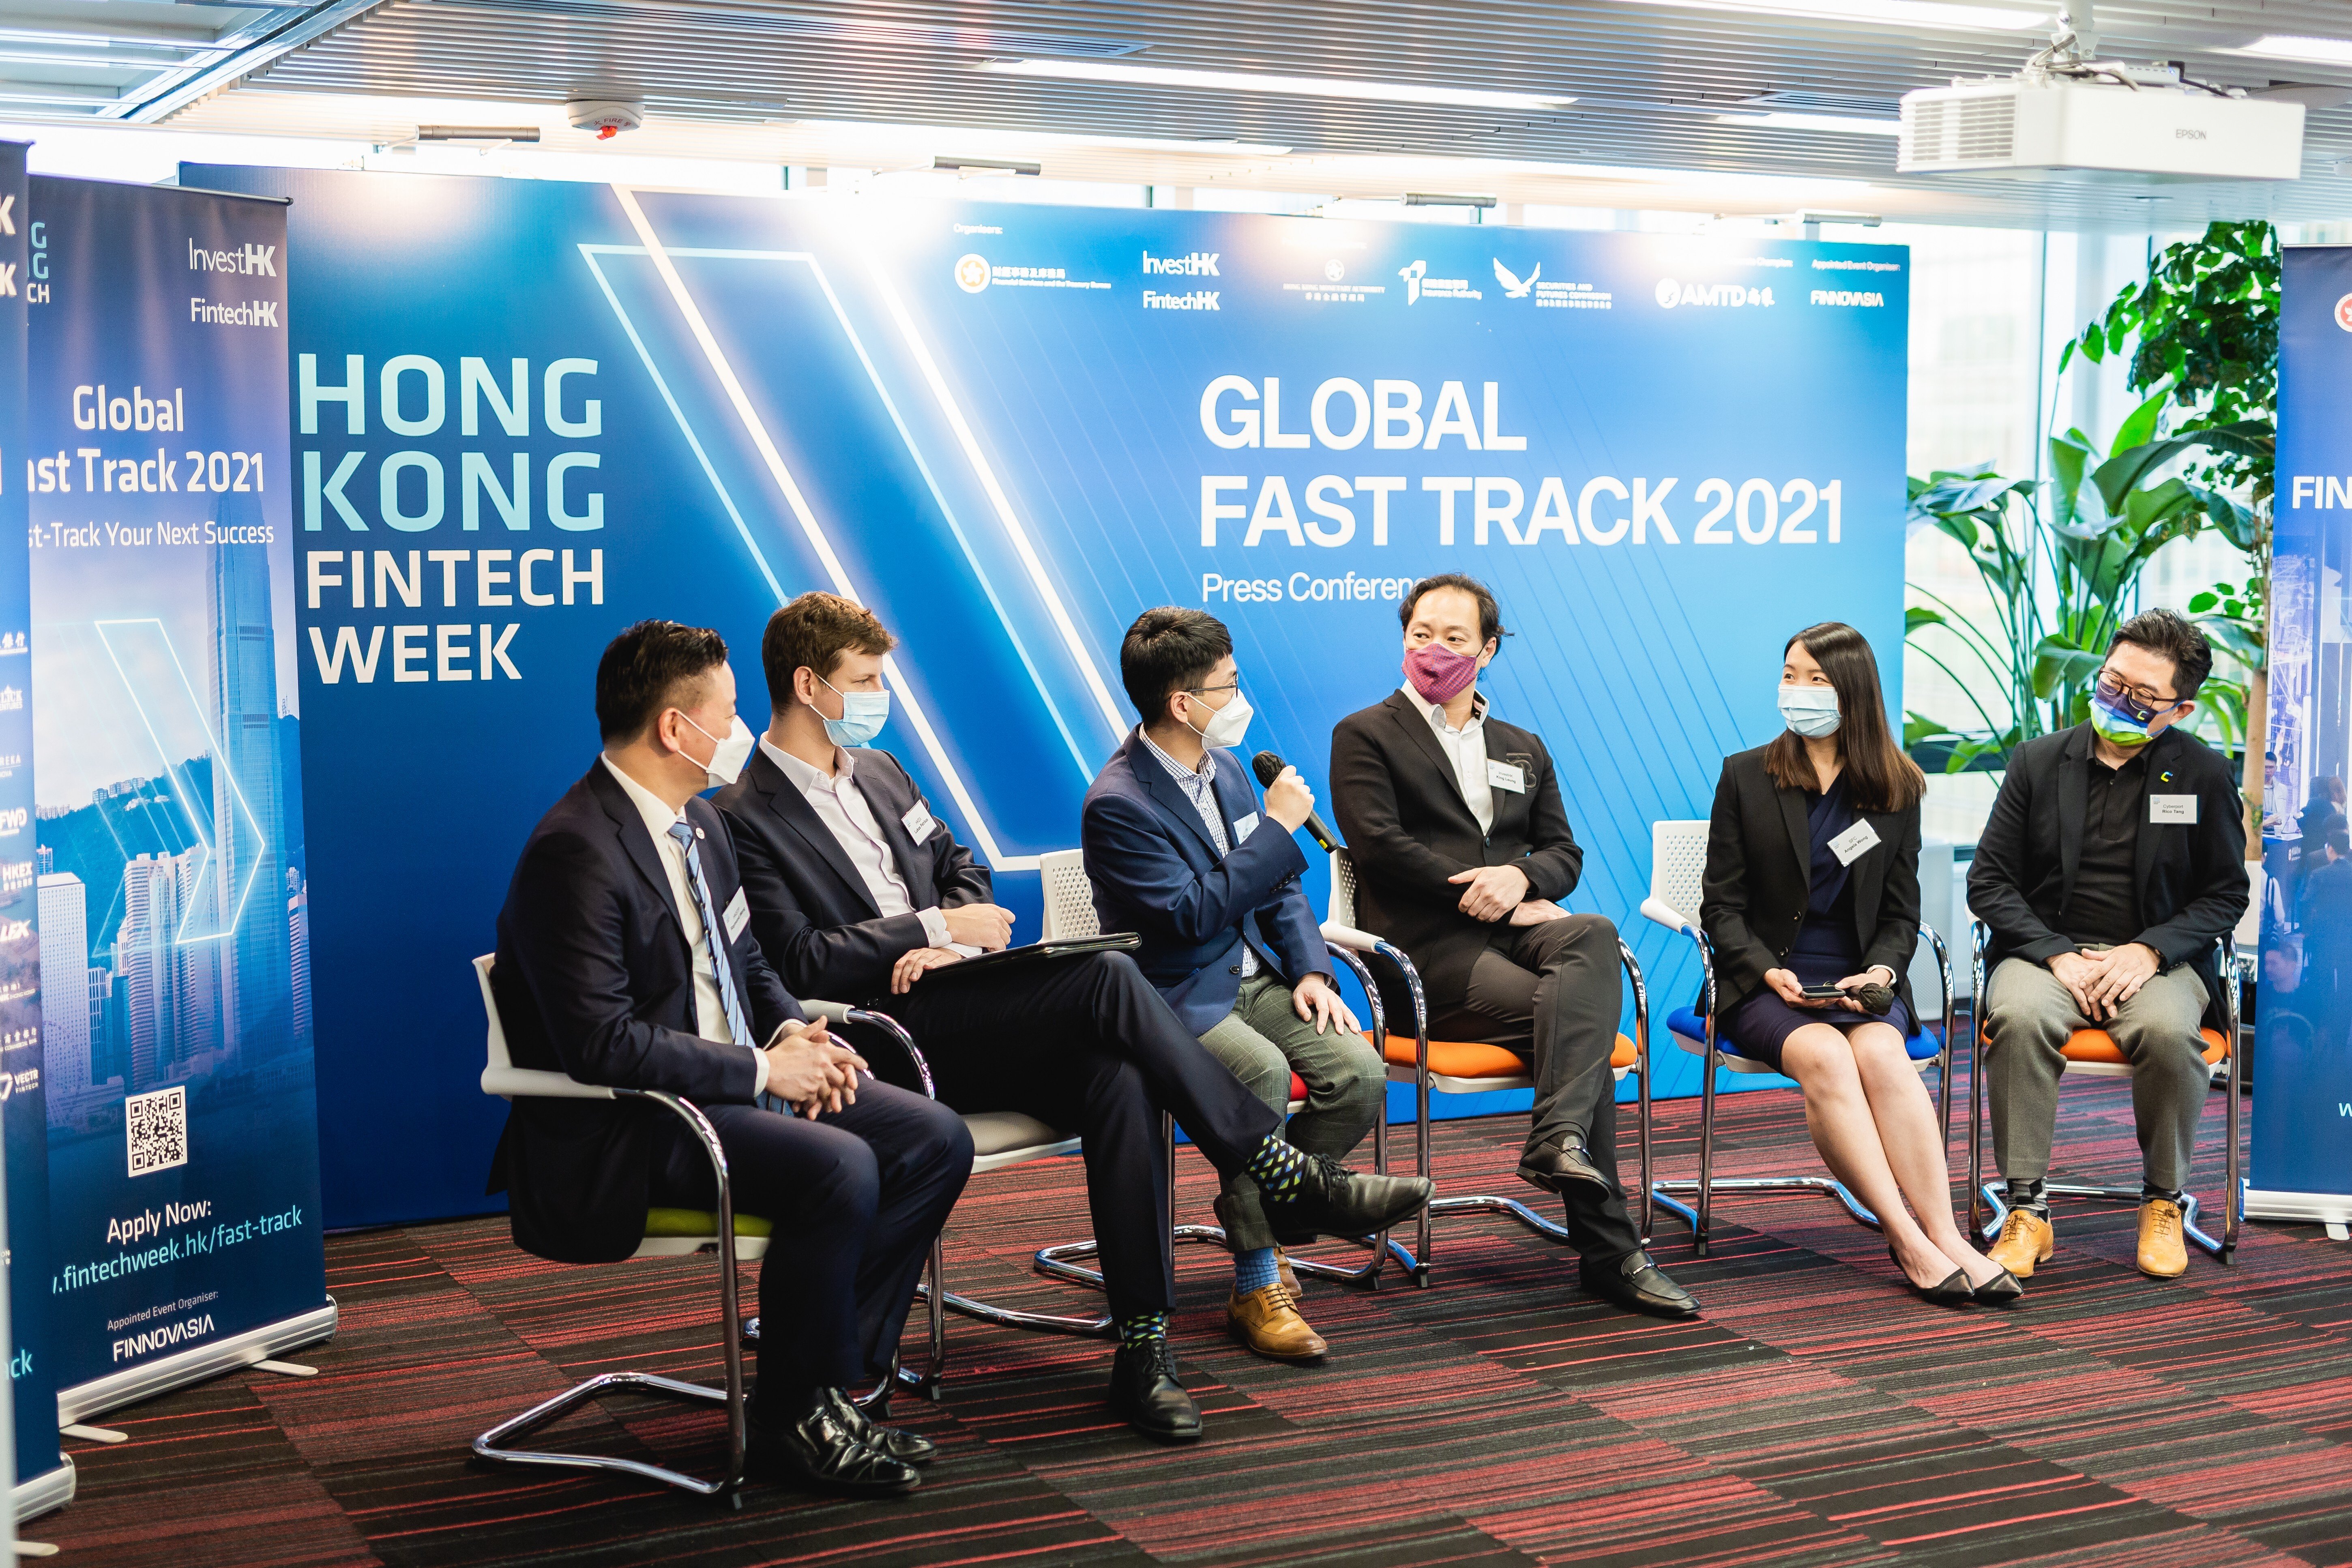 Invest Hong Kong’s Global Fast Track Programme 2021 offers qualified fintech companies the chance to scale up and experience fast-tracked access to potential clients and strategic investors.